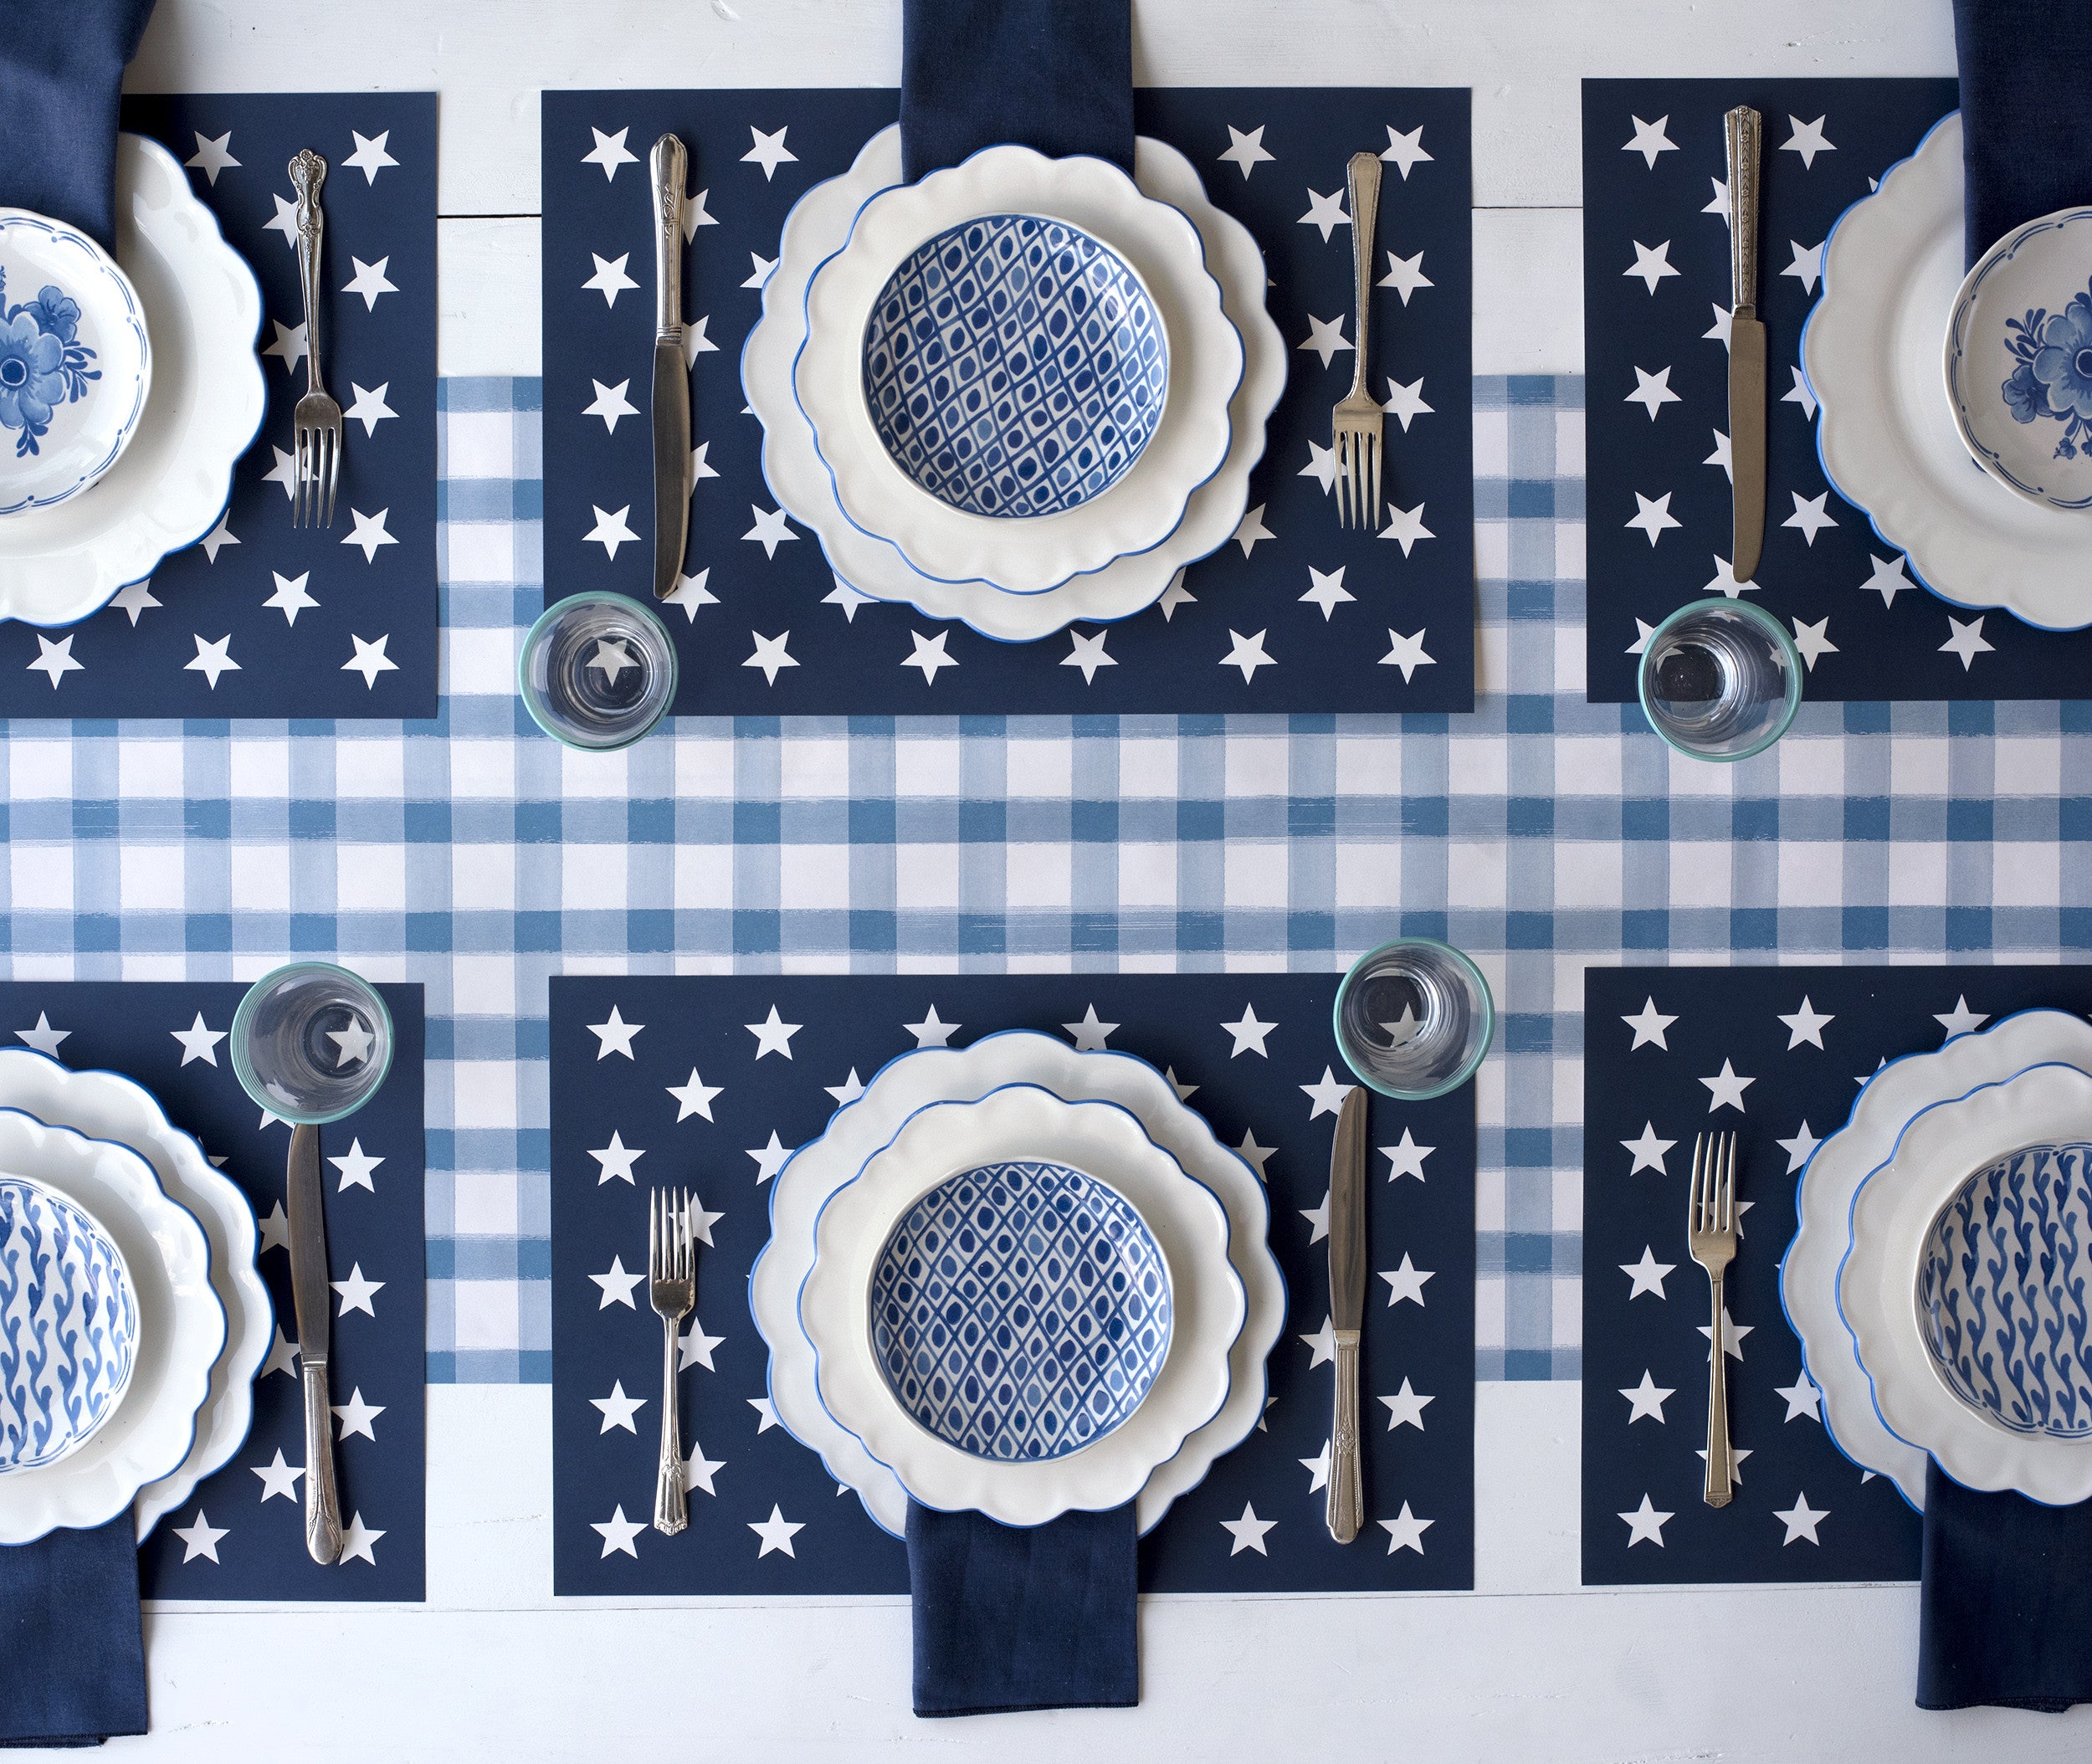 The Stars on Blue Placemat under an elegant table setting for six, from above.